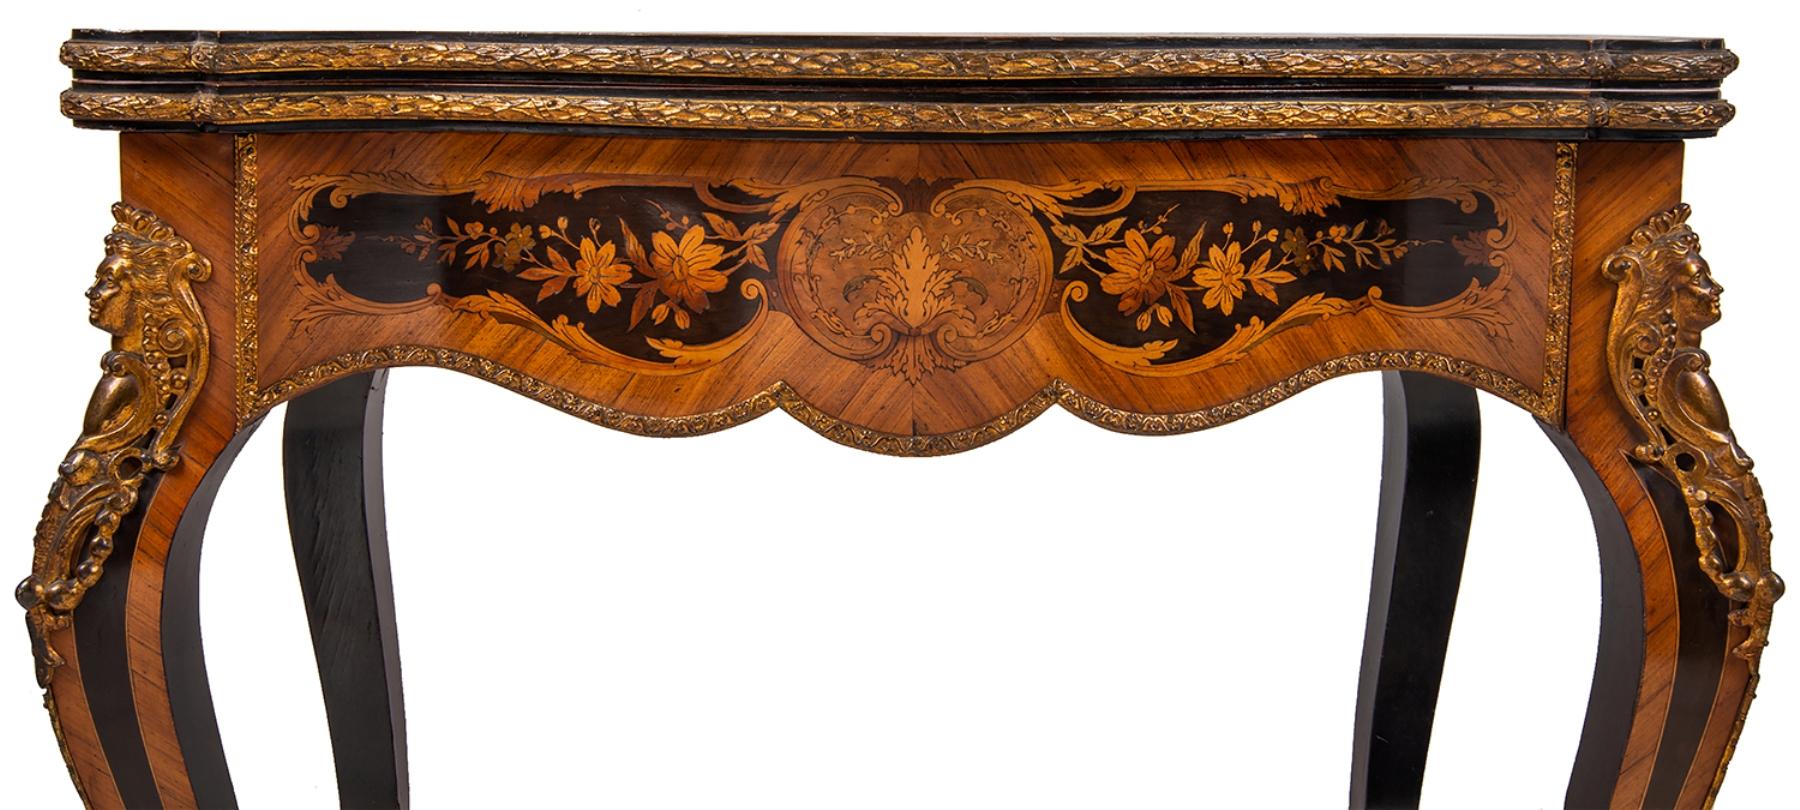 Louis XVI Style French Walnut Marquetry Inlaid Card Table For Sale 3